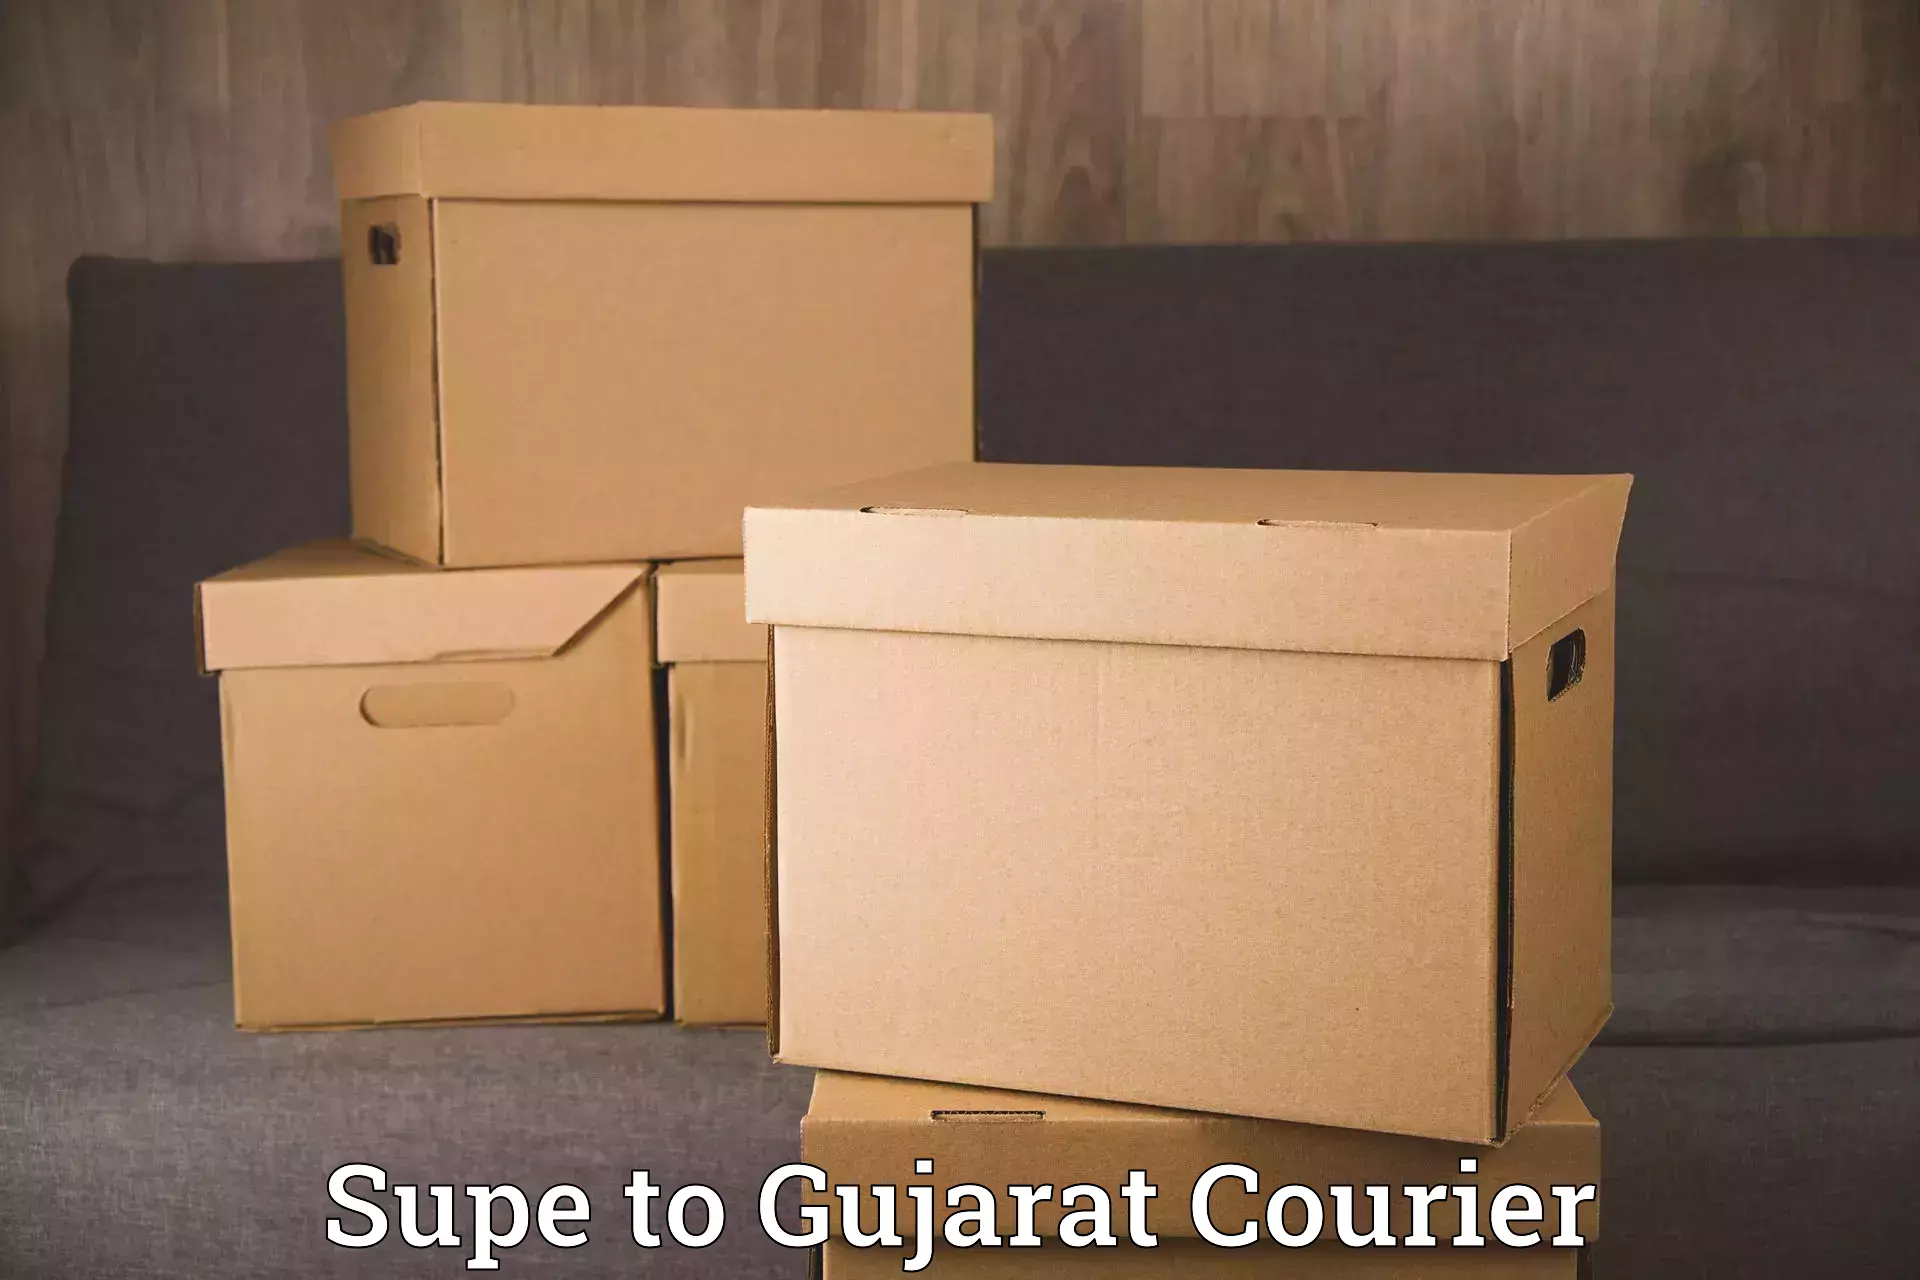 Trusted relocation experts Supe to Gujarat